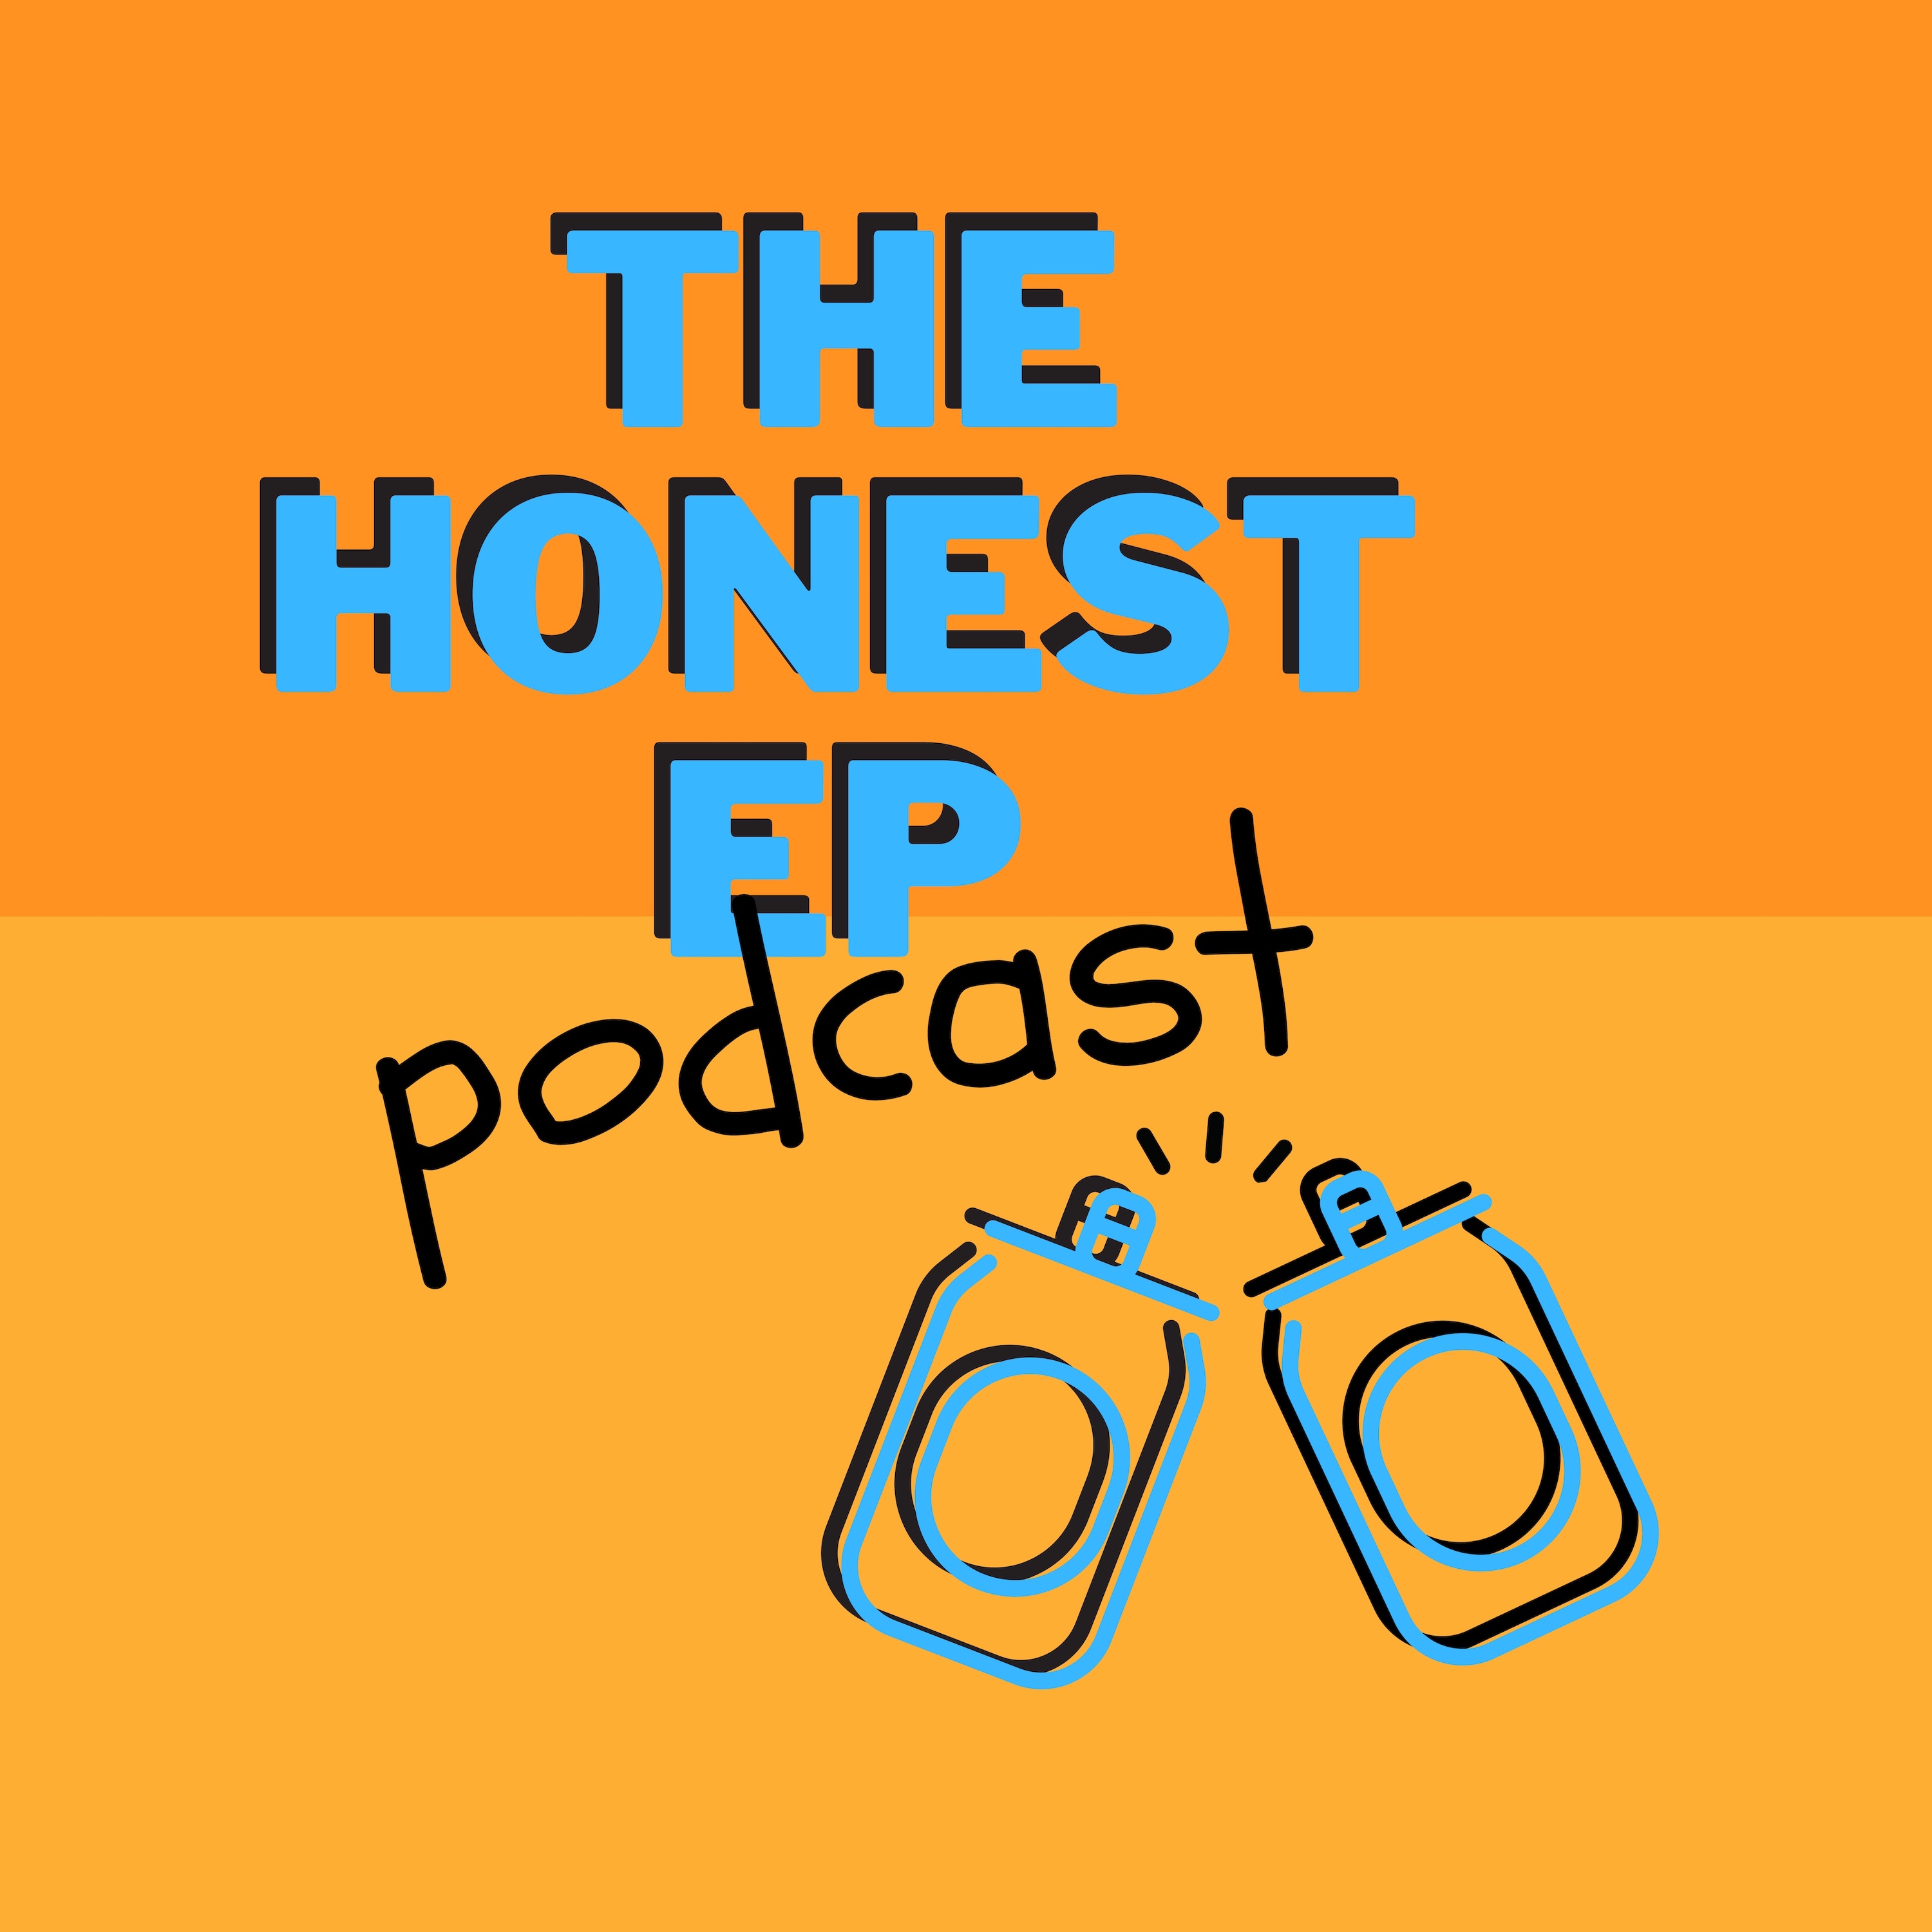 The Honest EP Podcast